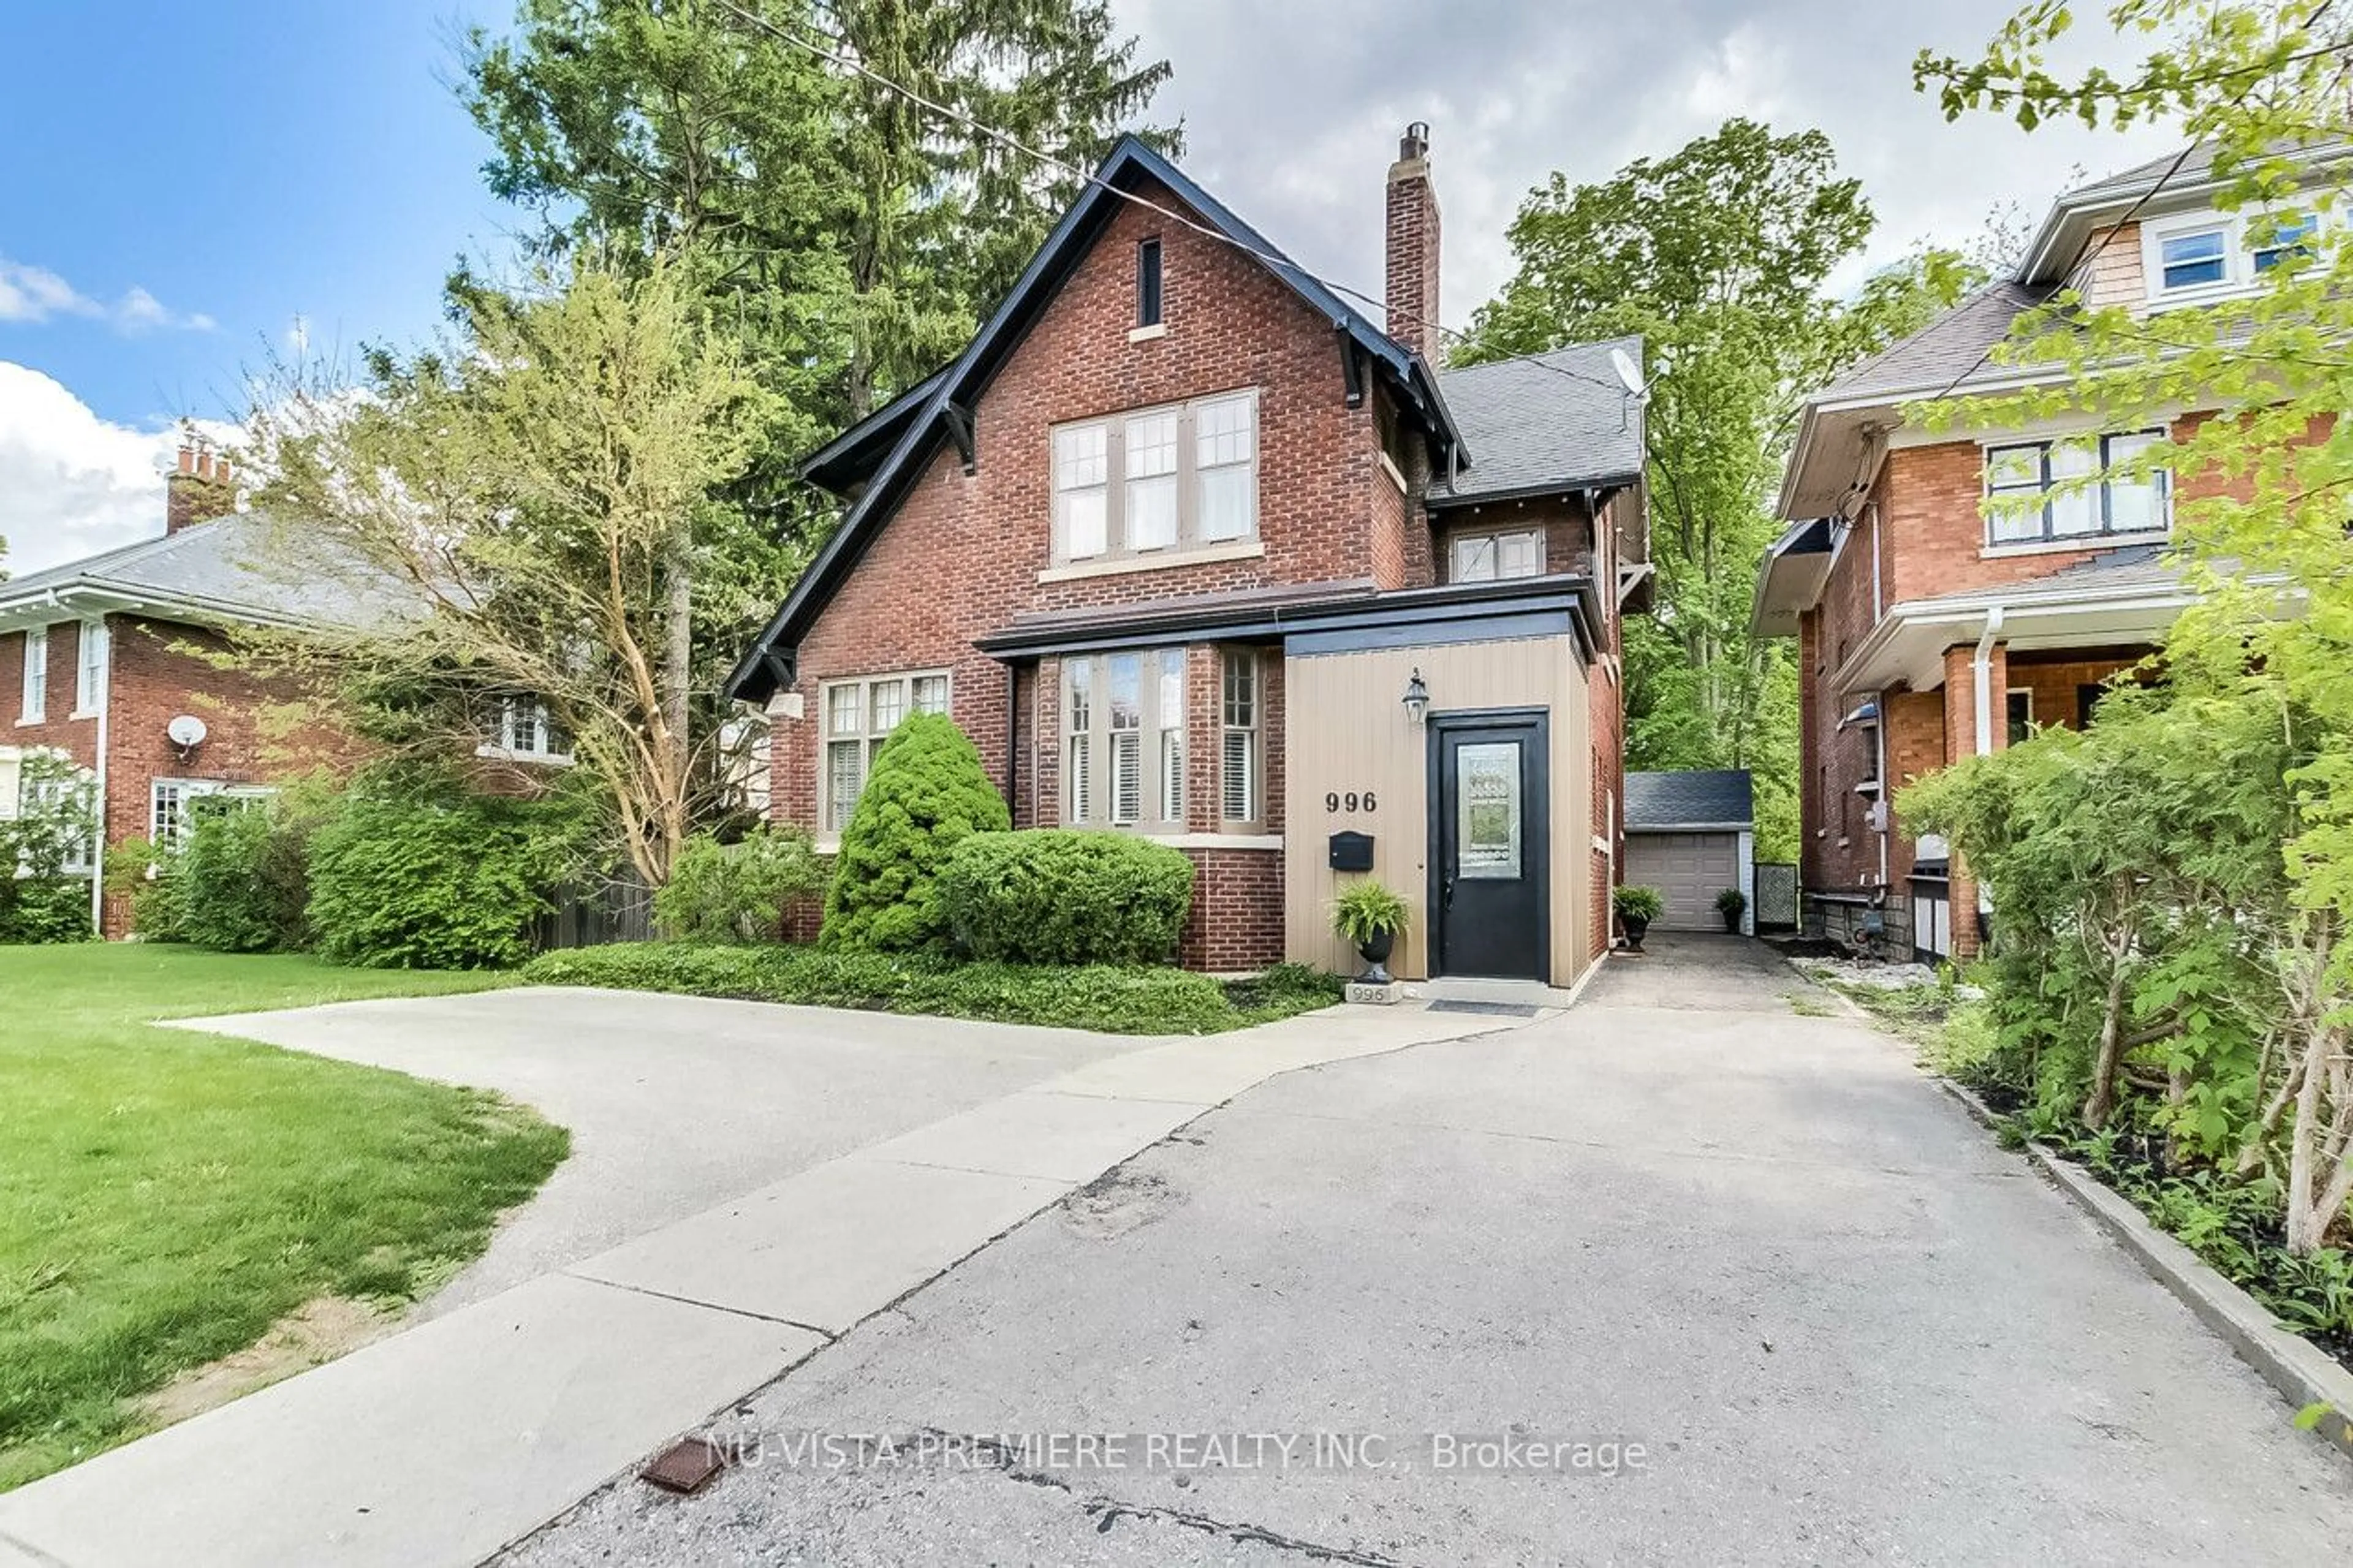 Home with brick exterior material for 996 Richmond St, London Ontario N6A 3J5